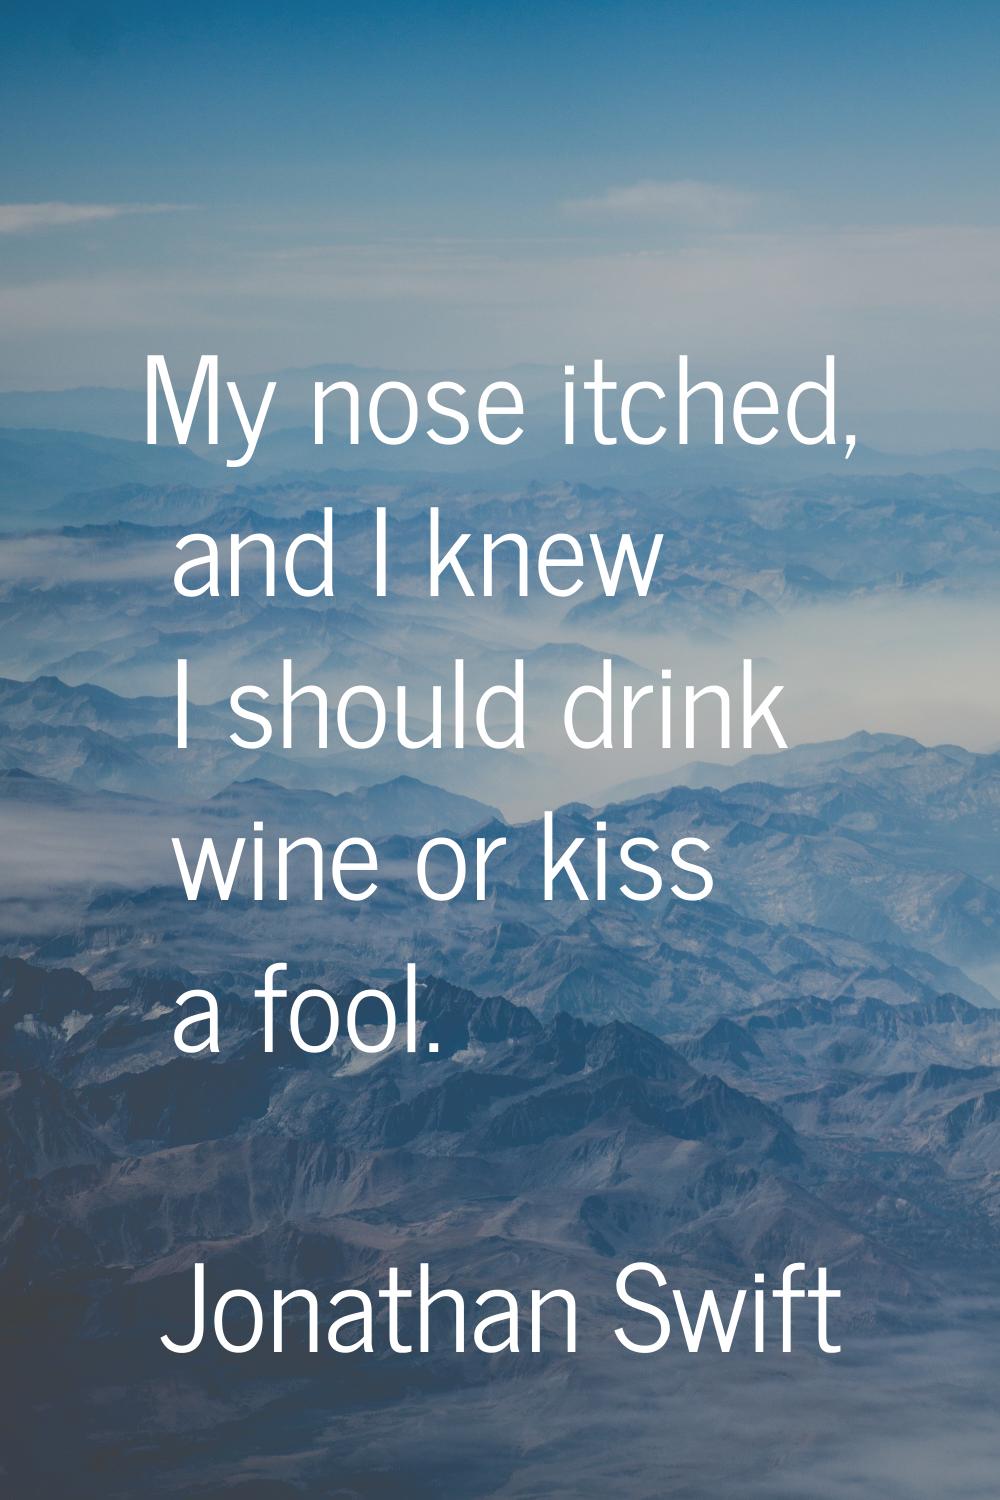 My nose itched, and I knew I should drink wine or kiss a fool.